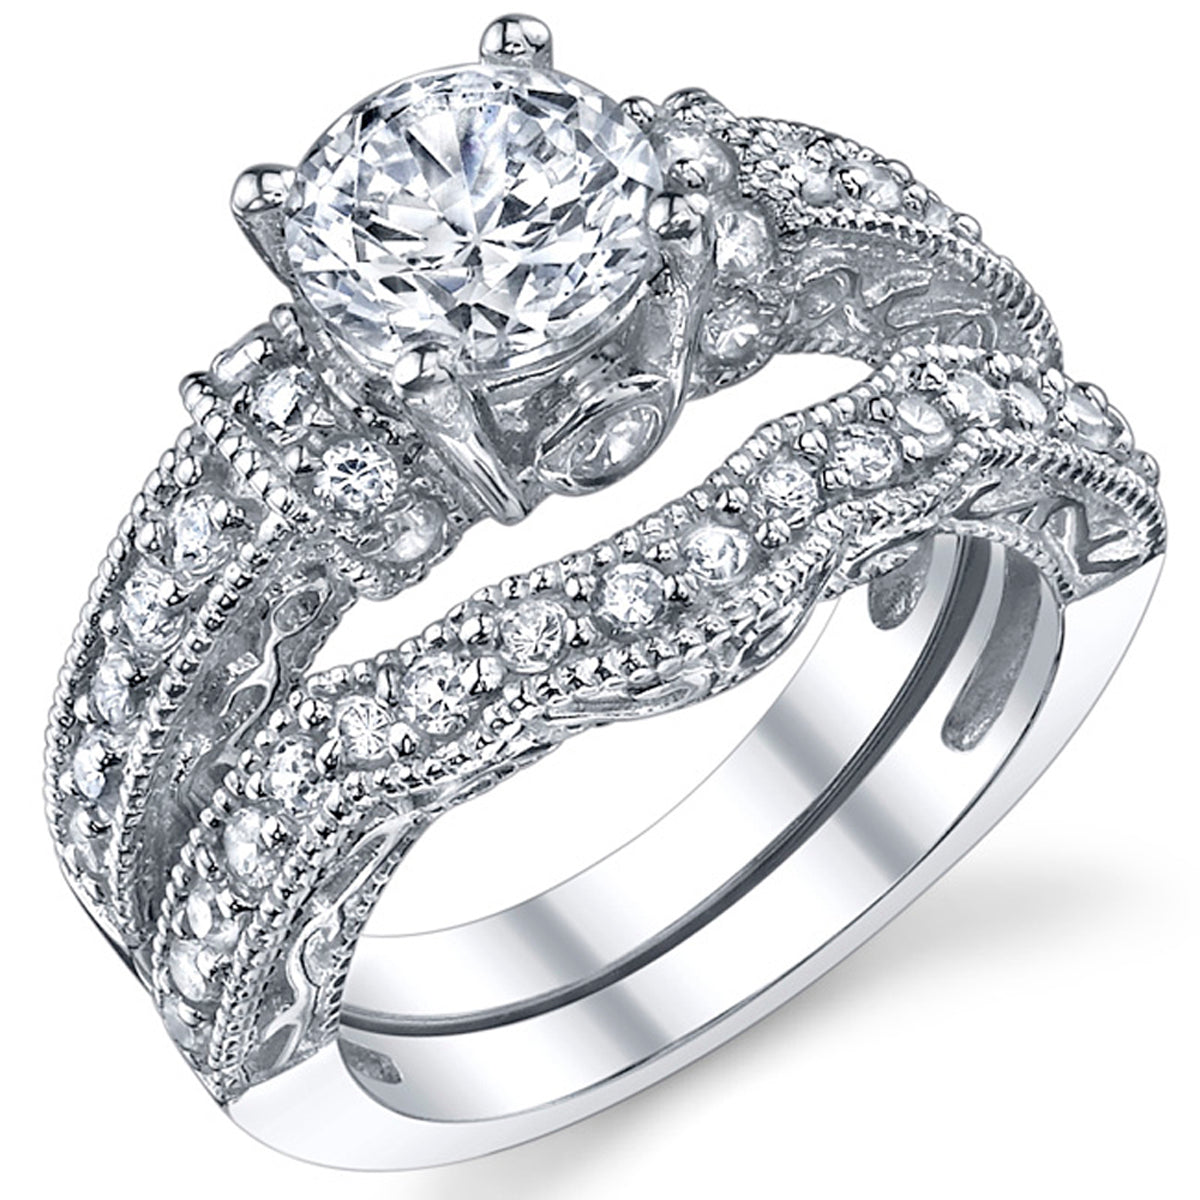 Women's 1.25 Carat Solid Sterling Silver Wedding Engagement